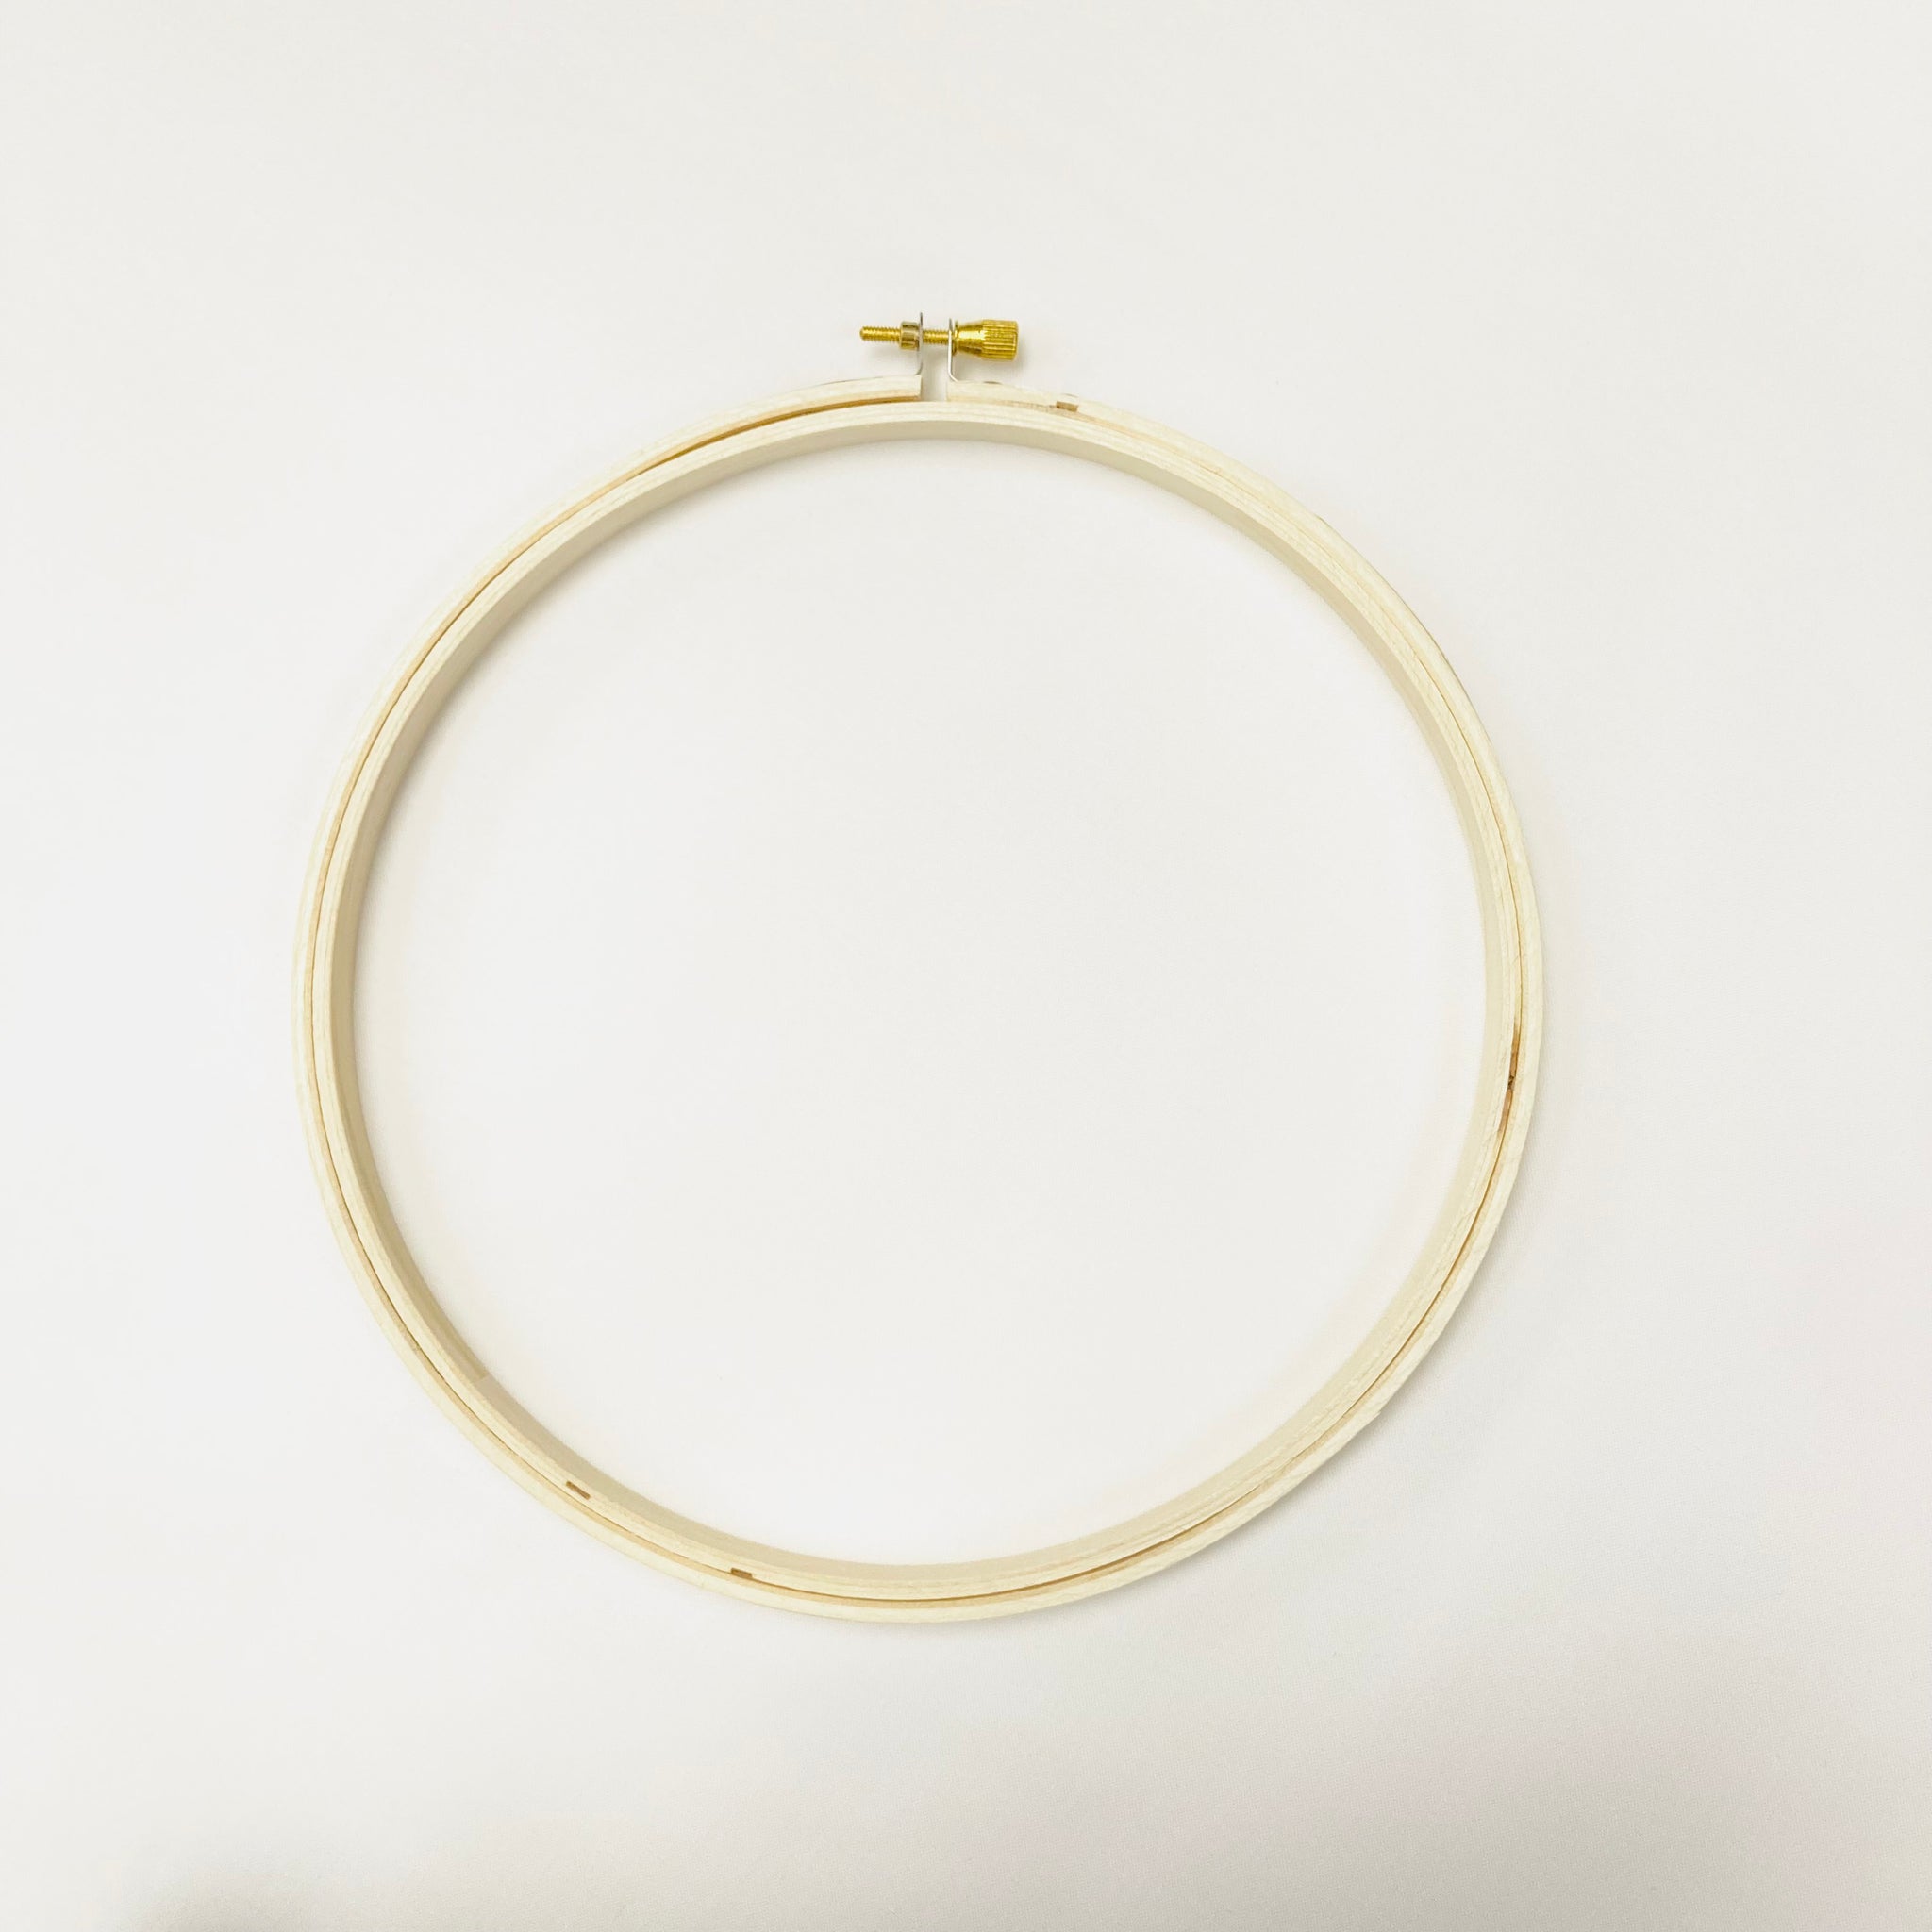 Embroidery Hoop - 8" (20cm) Round